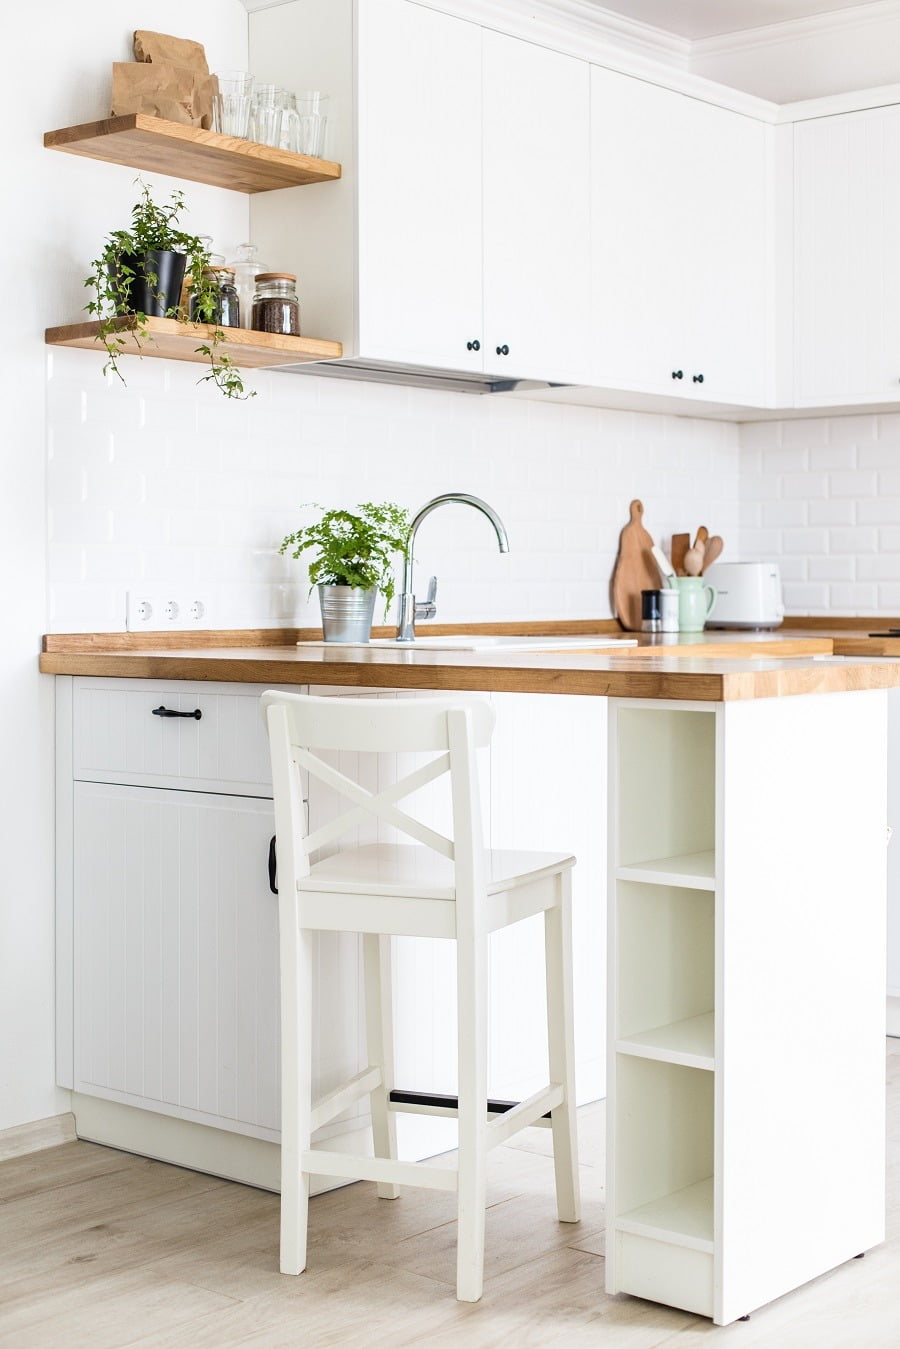 How to clean your kitchen like Marie Kondo